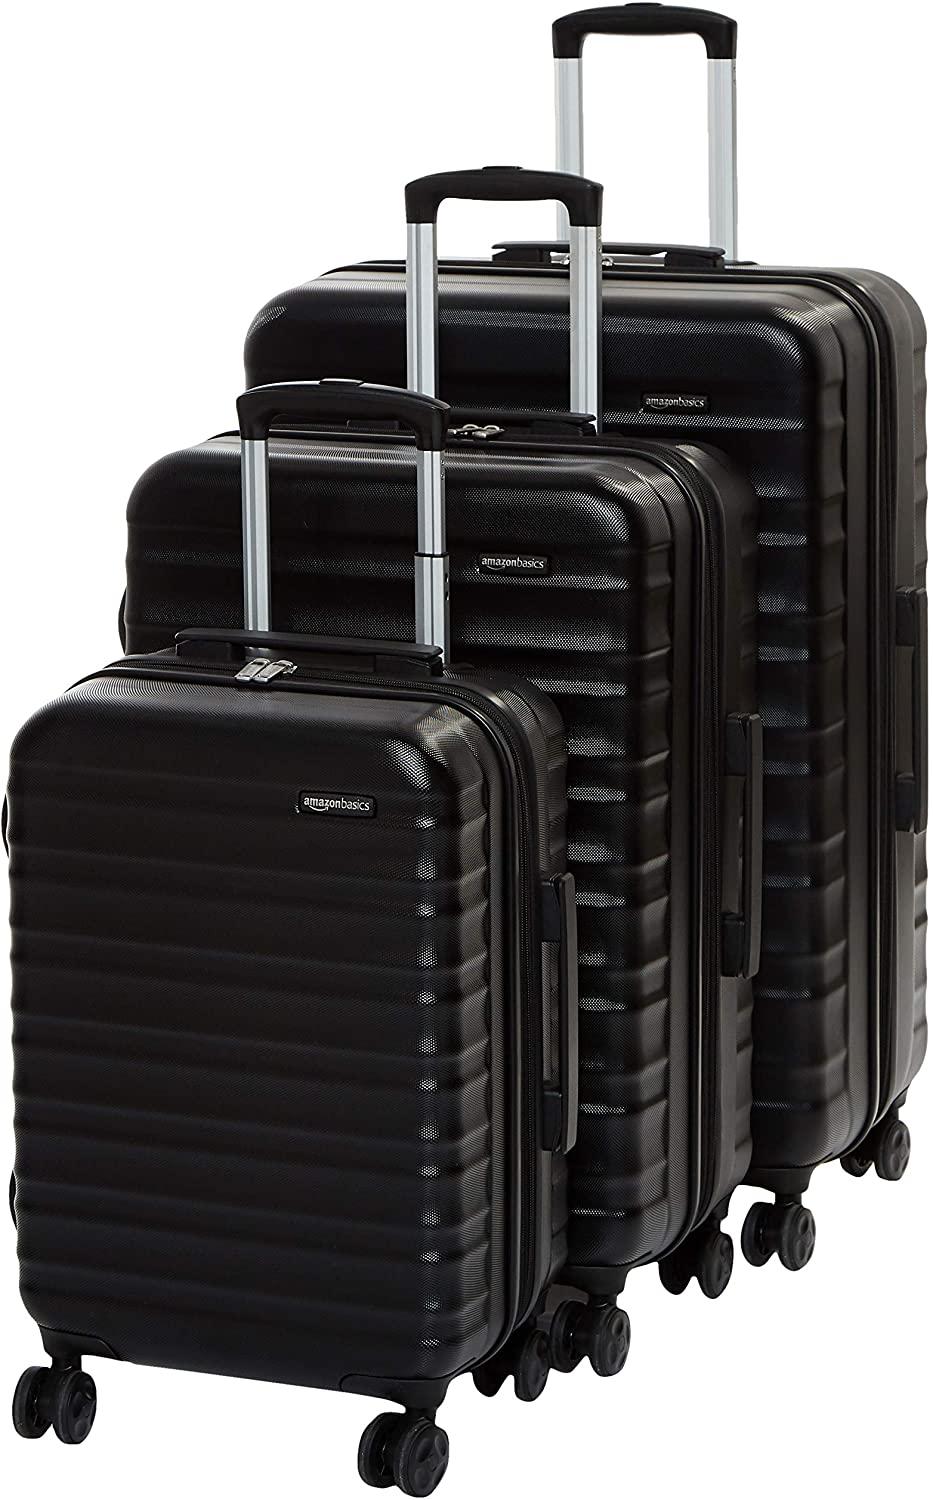 just slashed the price on these reviewer-loved Rockland luggage sets  - CBS News